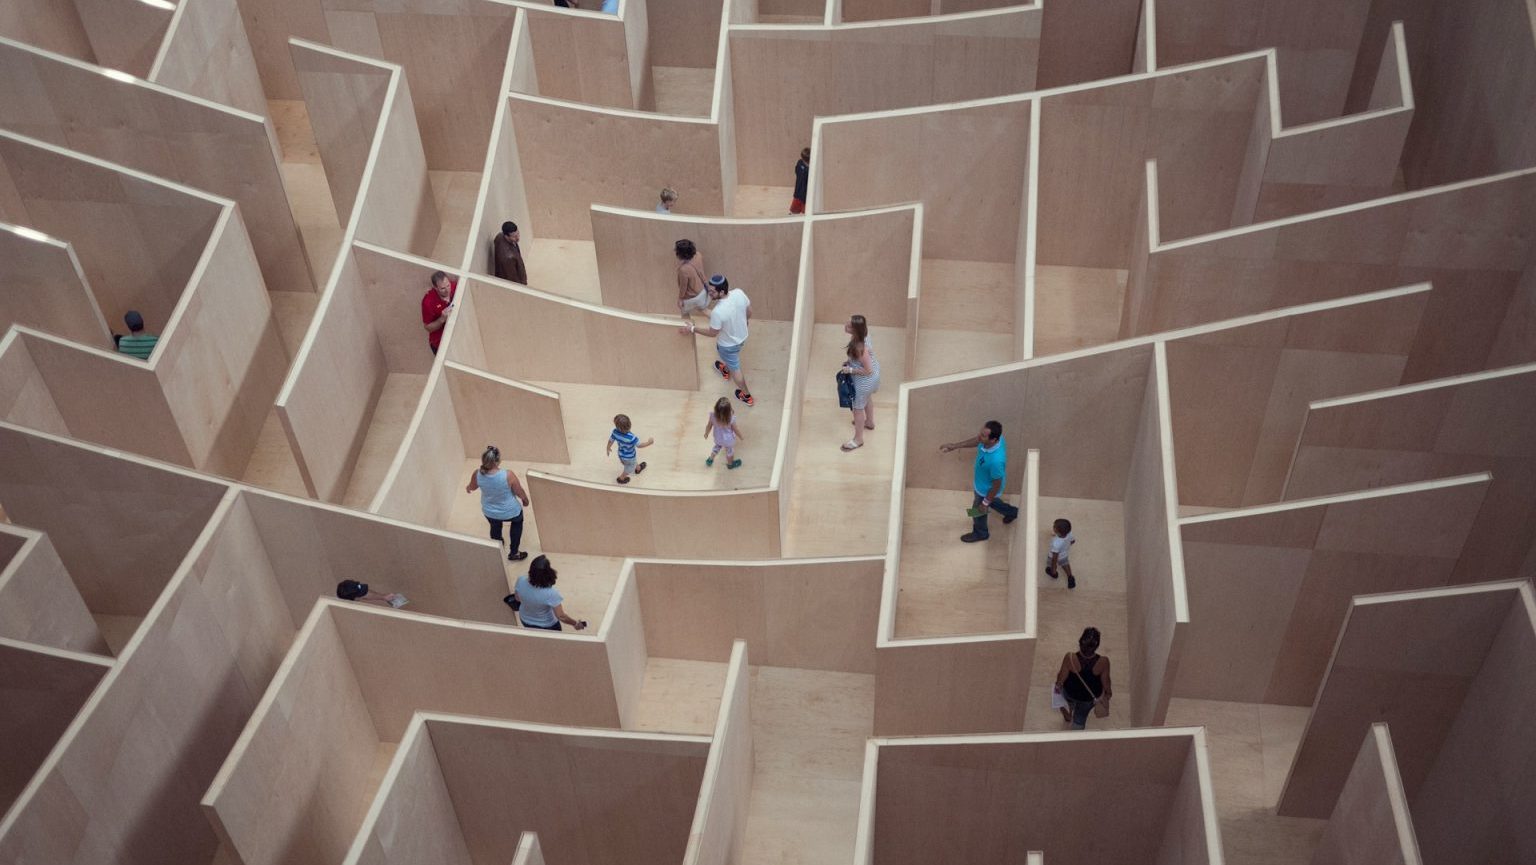 Visitors exploring why people get lost in a large, complex wooden maze installation in an indoor gallery setting.